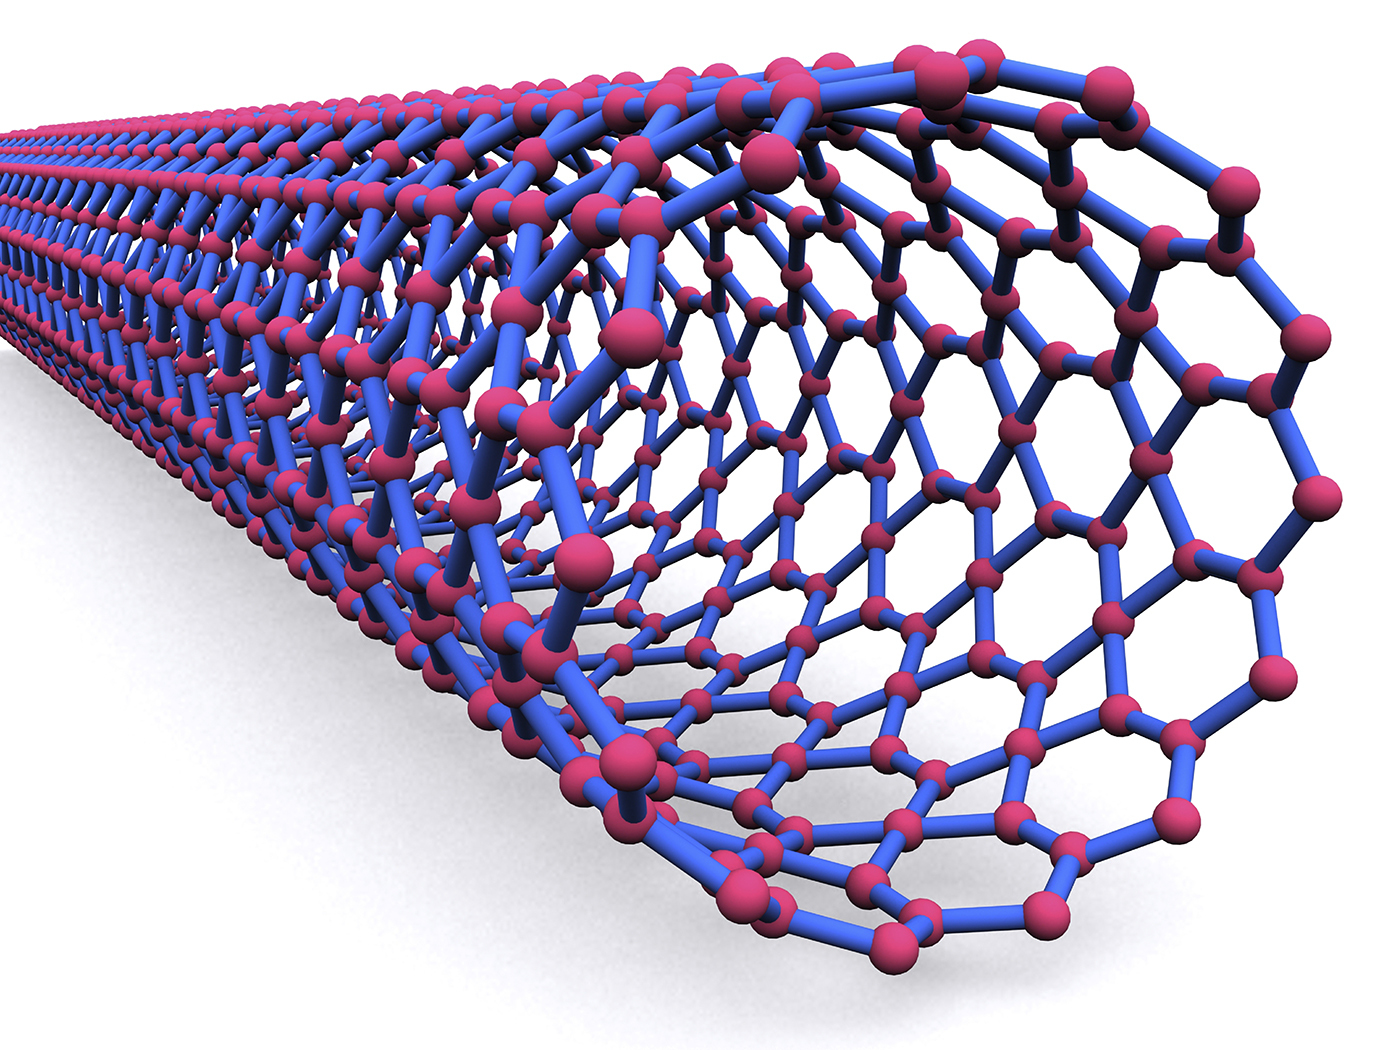 This is a visualization of a single nanotube, which looks like hexagonal compounds woven together in a cylindrical shape, isolated on a white background.